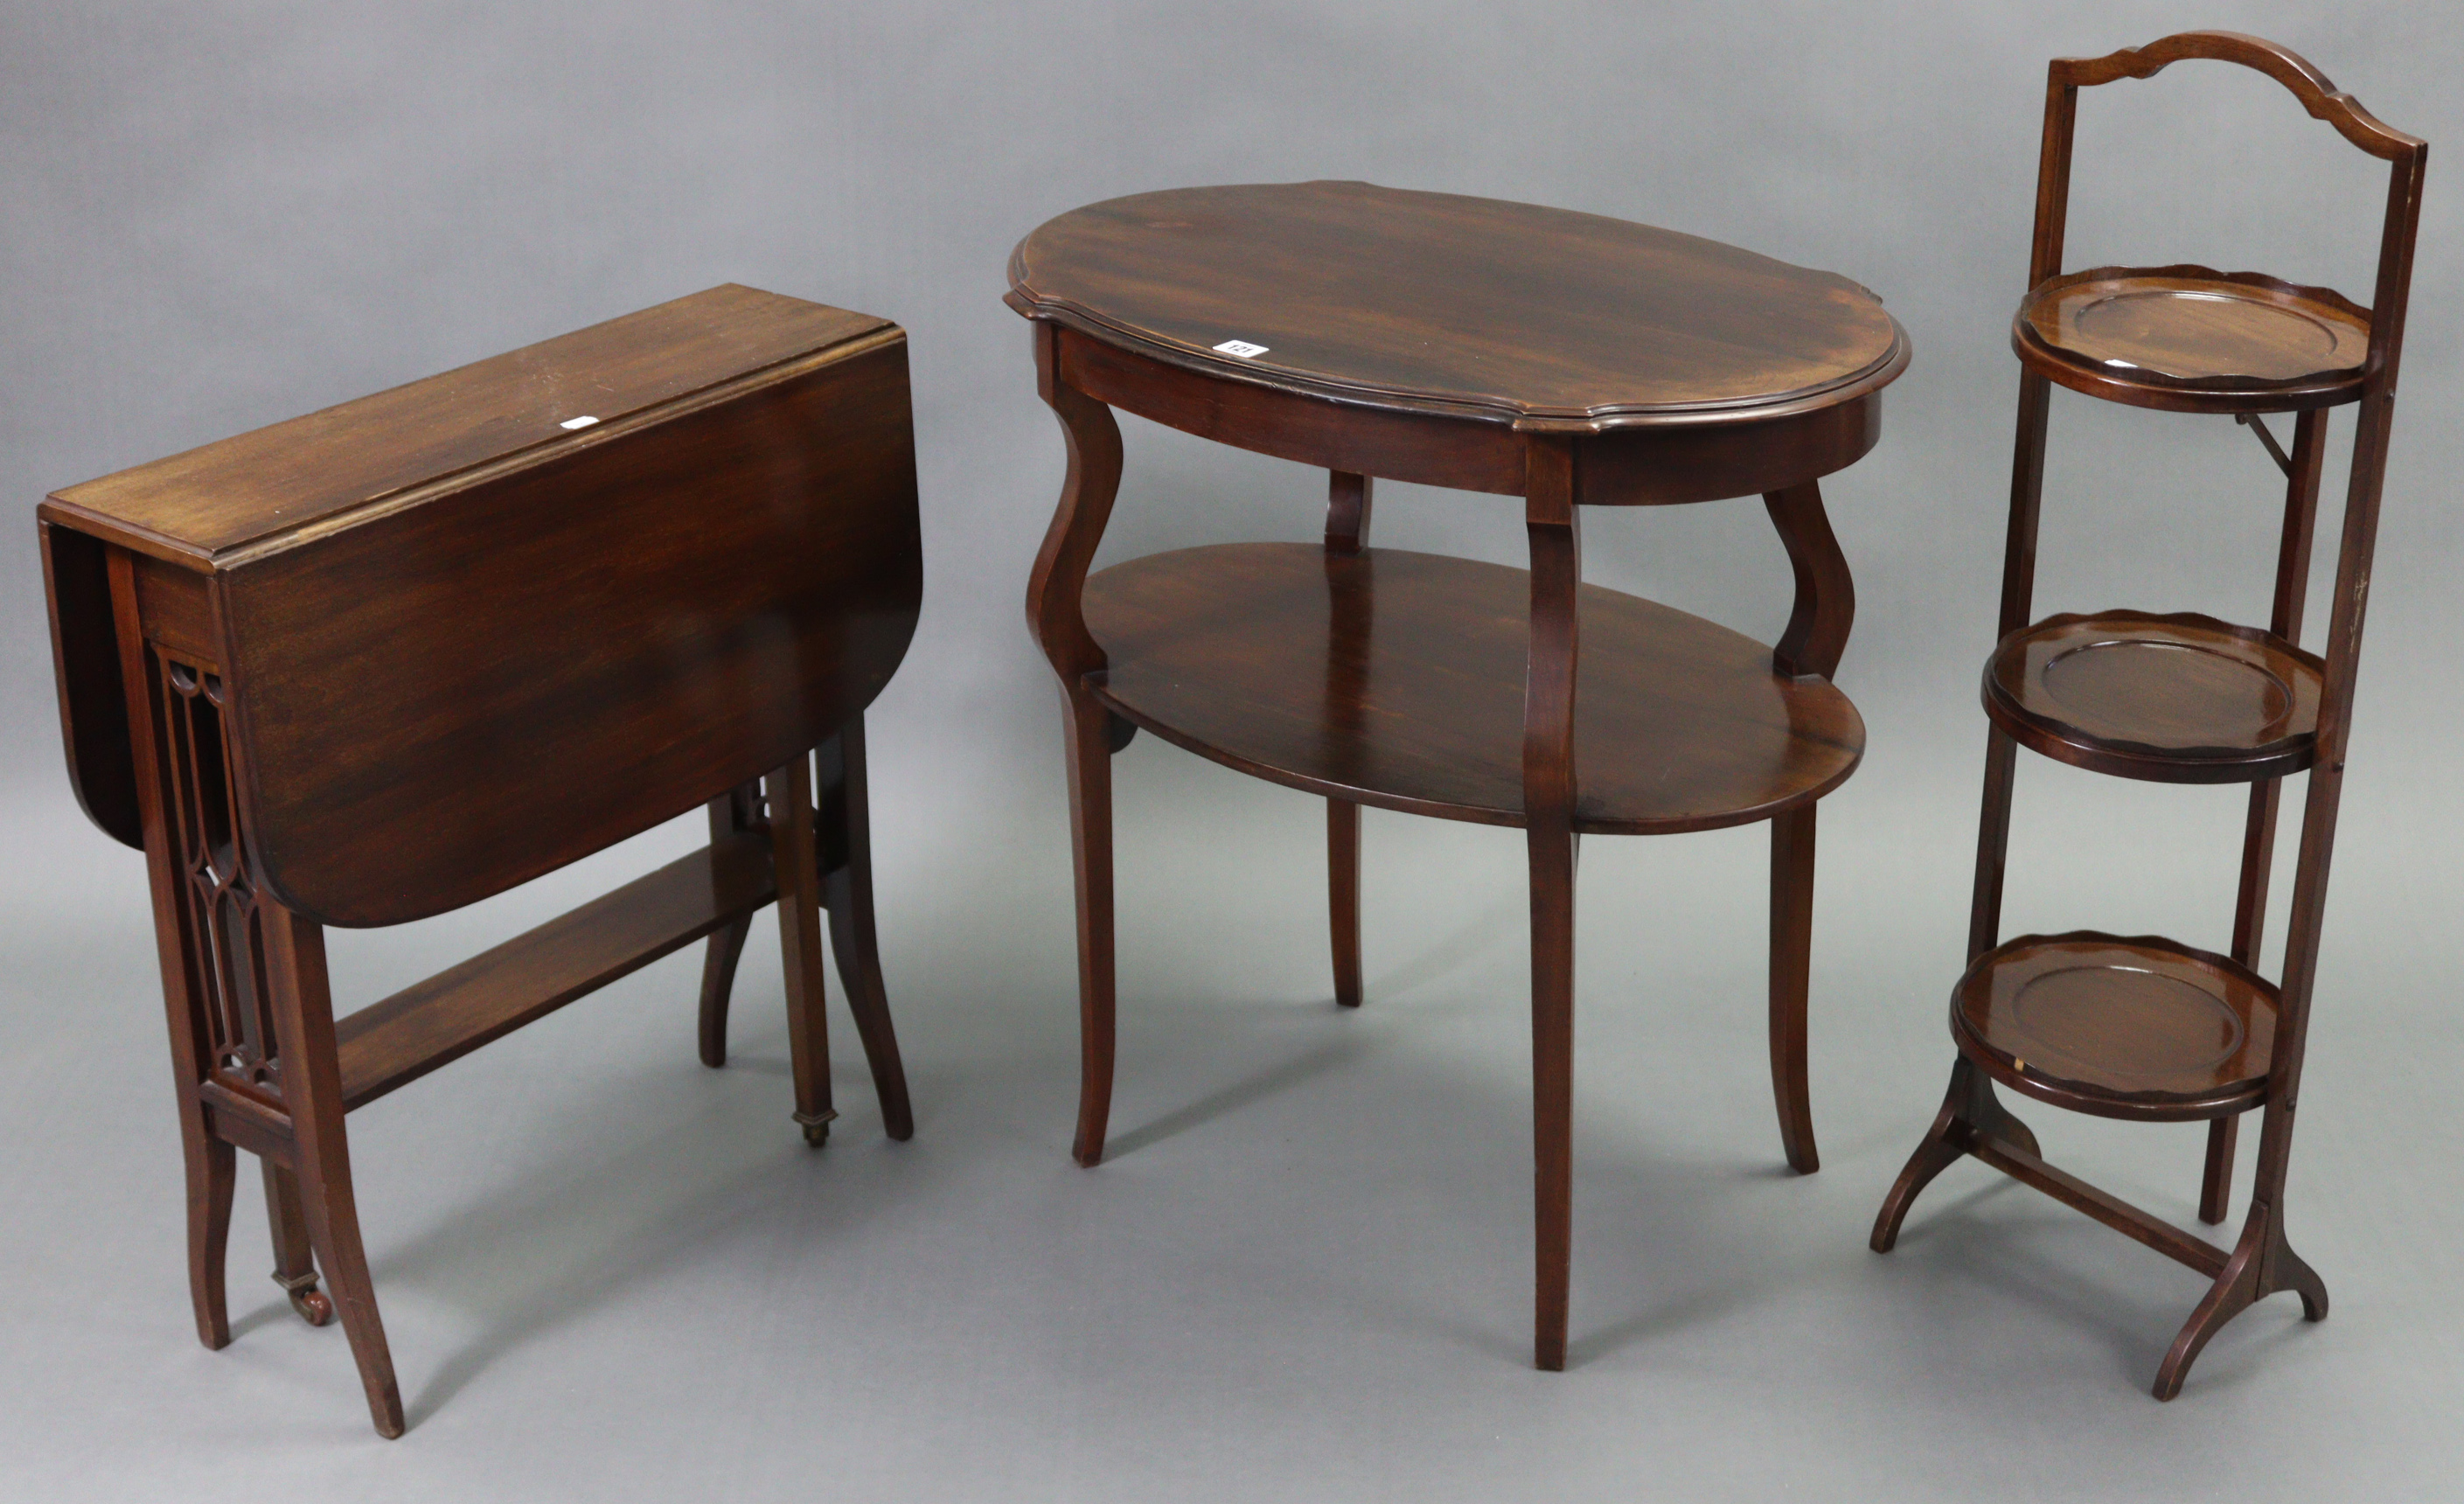 An Edwardian mahogany oval occasional table on four cabriole legs with open undertier, 27” wide;